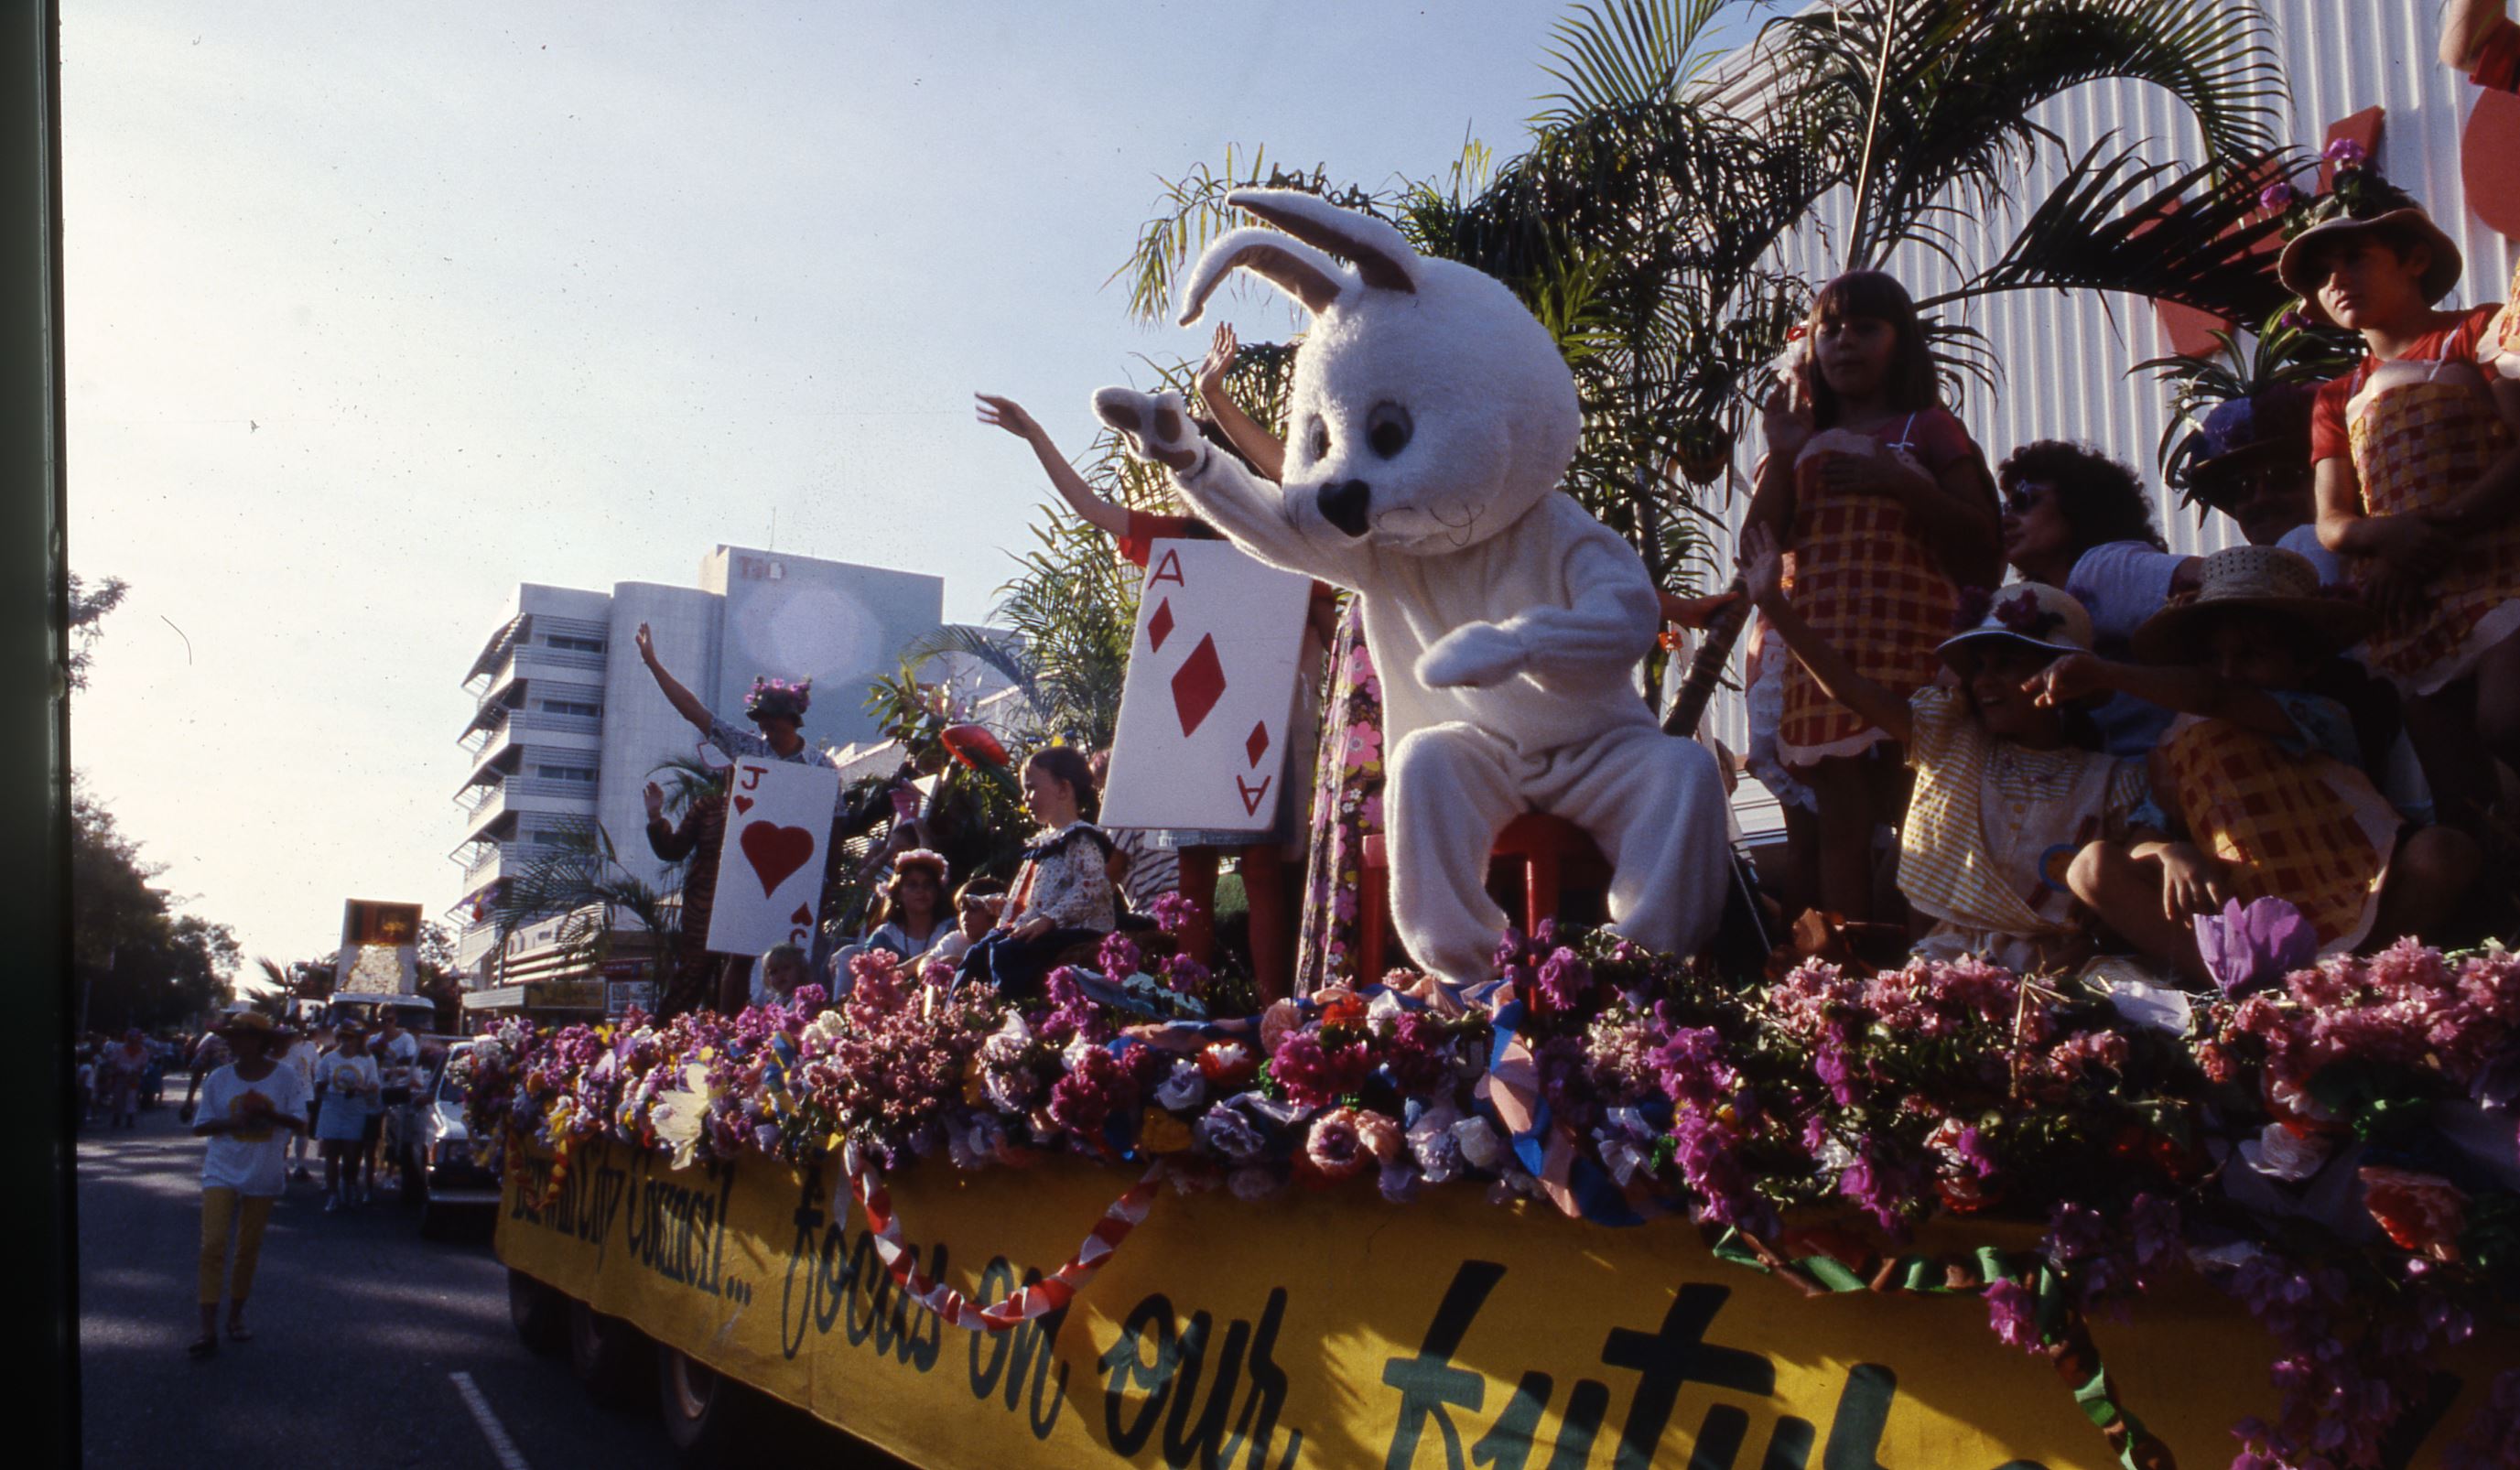 [Bougainvillea Festival Parade, 13 June 1987] <br />Image courtesy of Northern Territory Archives Service, Department of Chief Minister, NTRS 3822 P1, Folder 37 Slide 315.